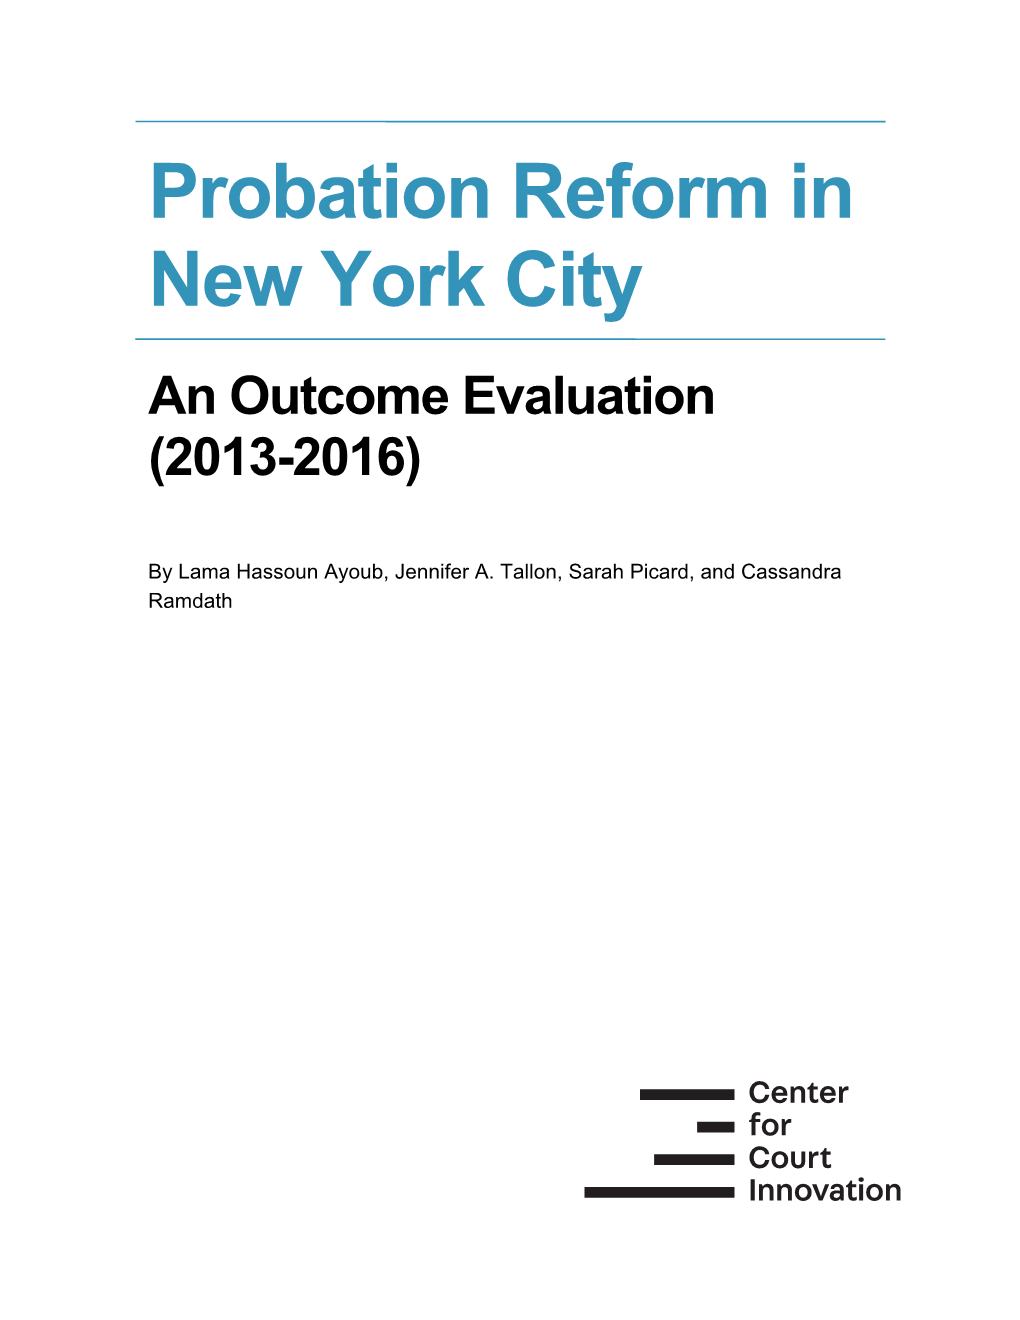 Probation Reform in New York City: an Outcome Evaluation from 2013 to 2016